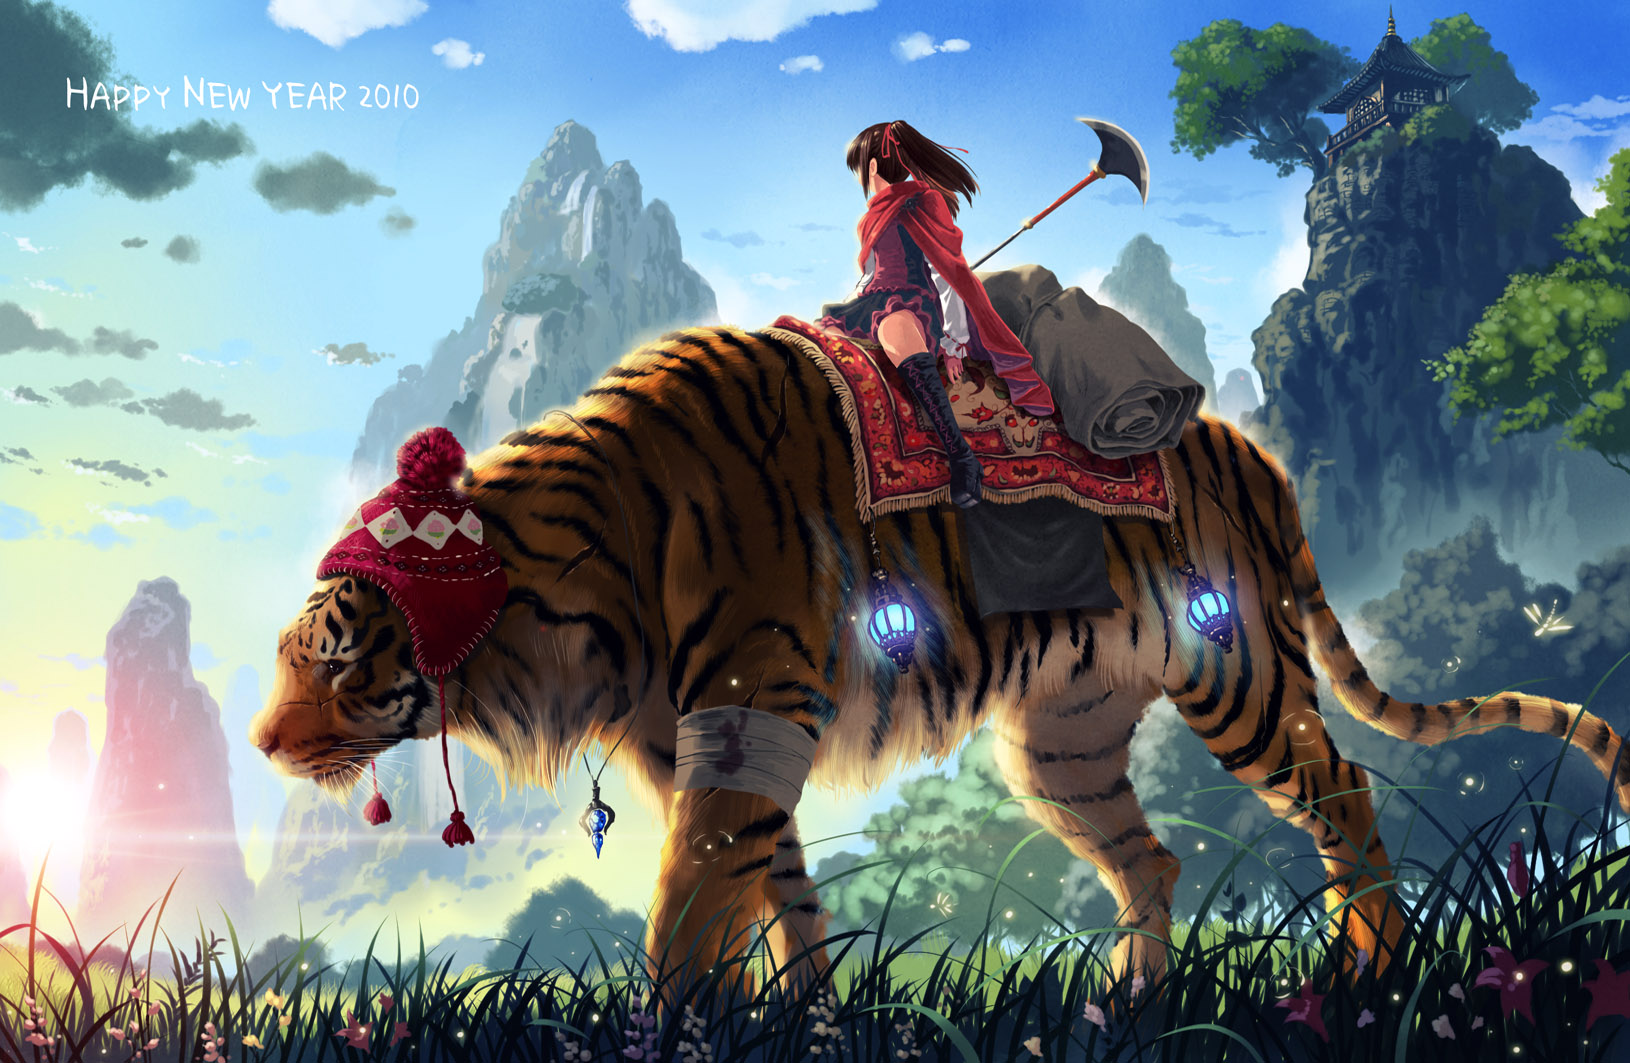 Anime 1630x1063 tiger anime girls nature mountains weapon fireflies sunset sunset glow Sunset Shimmer clouds grass winter clothing New Year wounds injured bandages flowers night lanterns trees field Sun fantasy art big cats animals creature Sunset Skyline